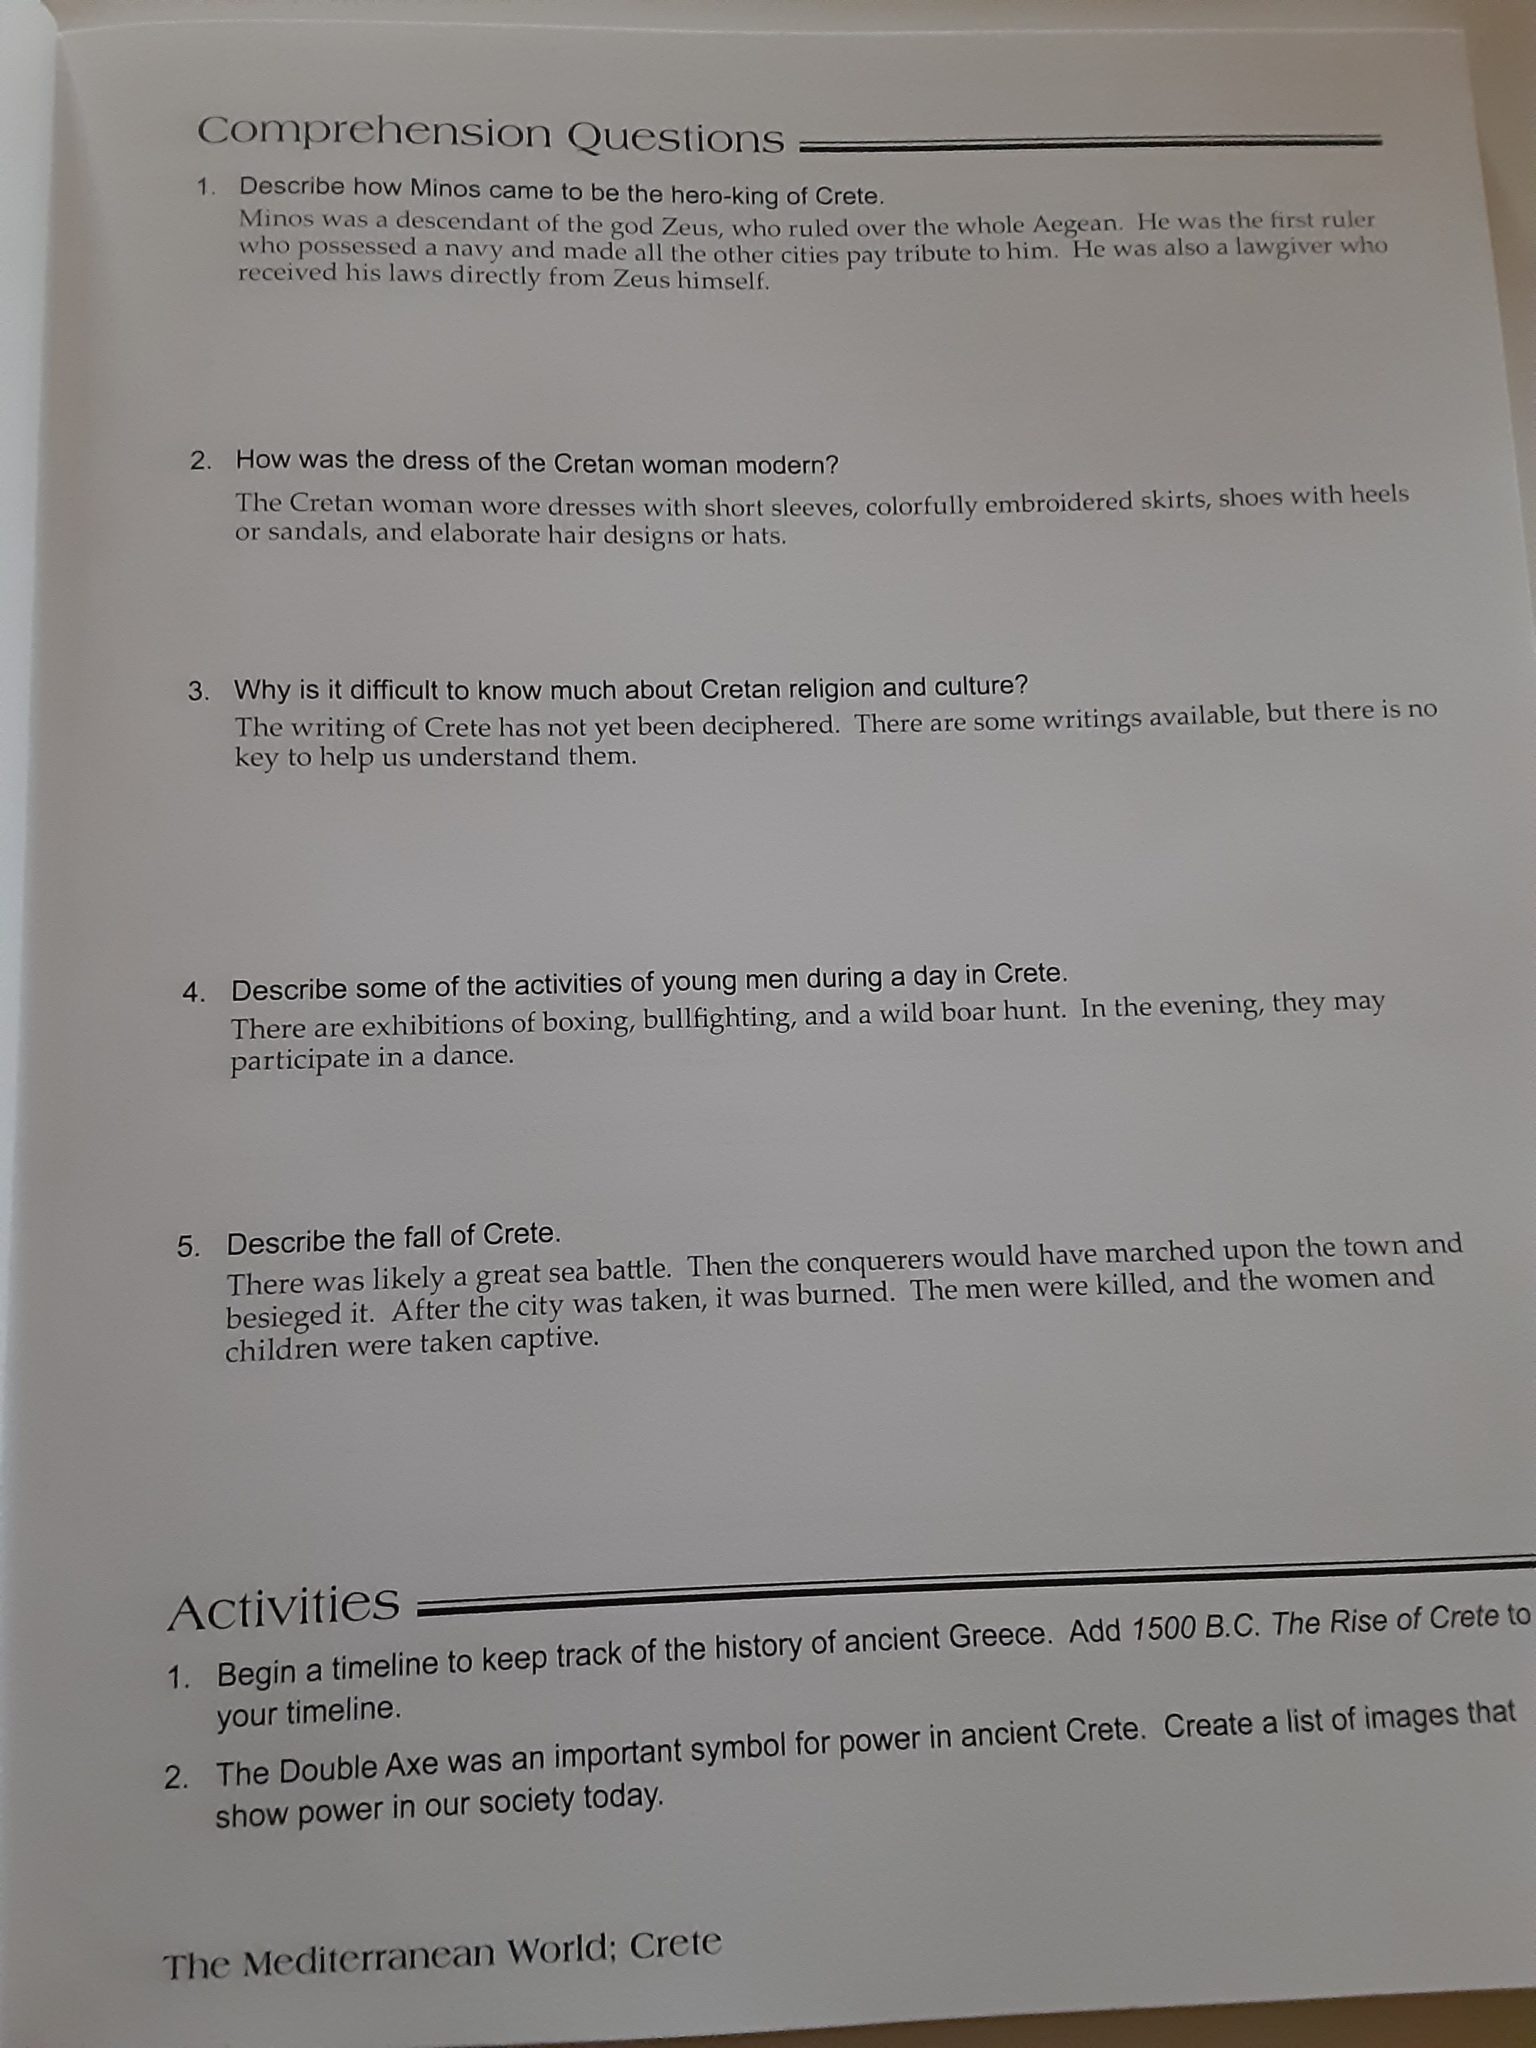 Sample page of teacher manual with answers filled in for comprehension questions.